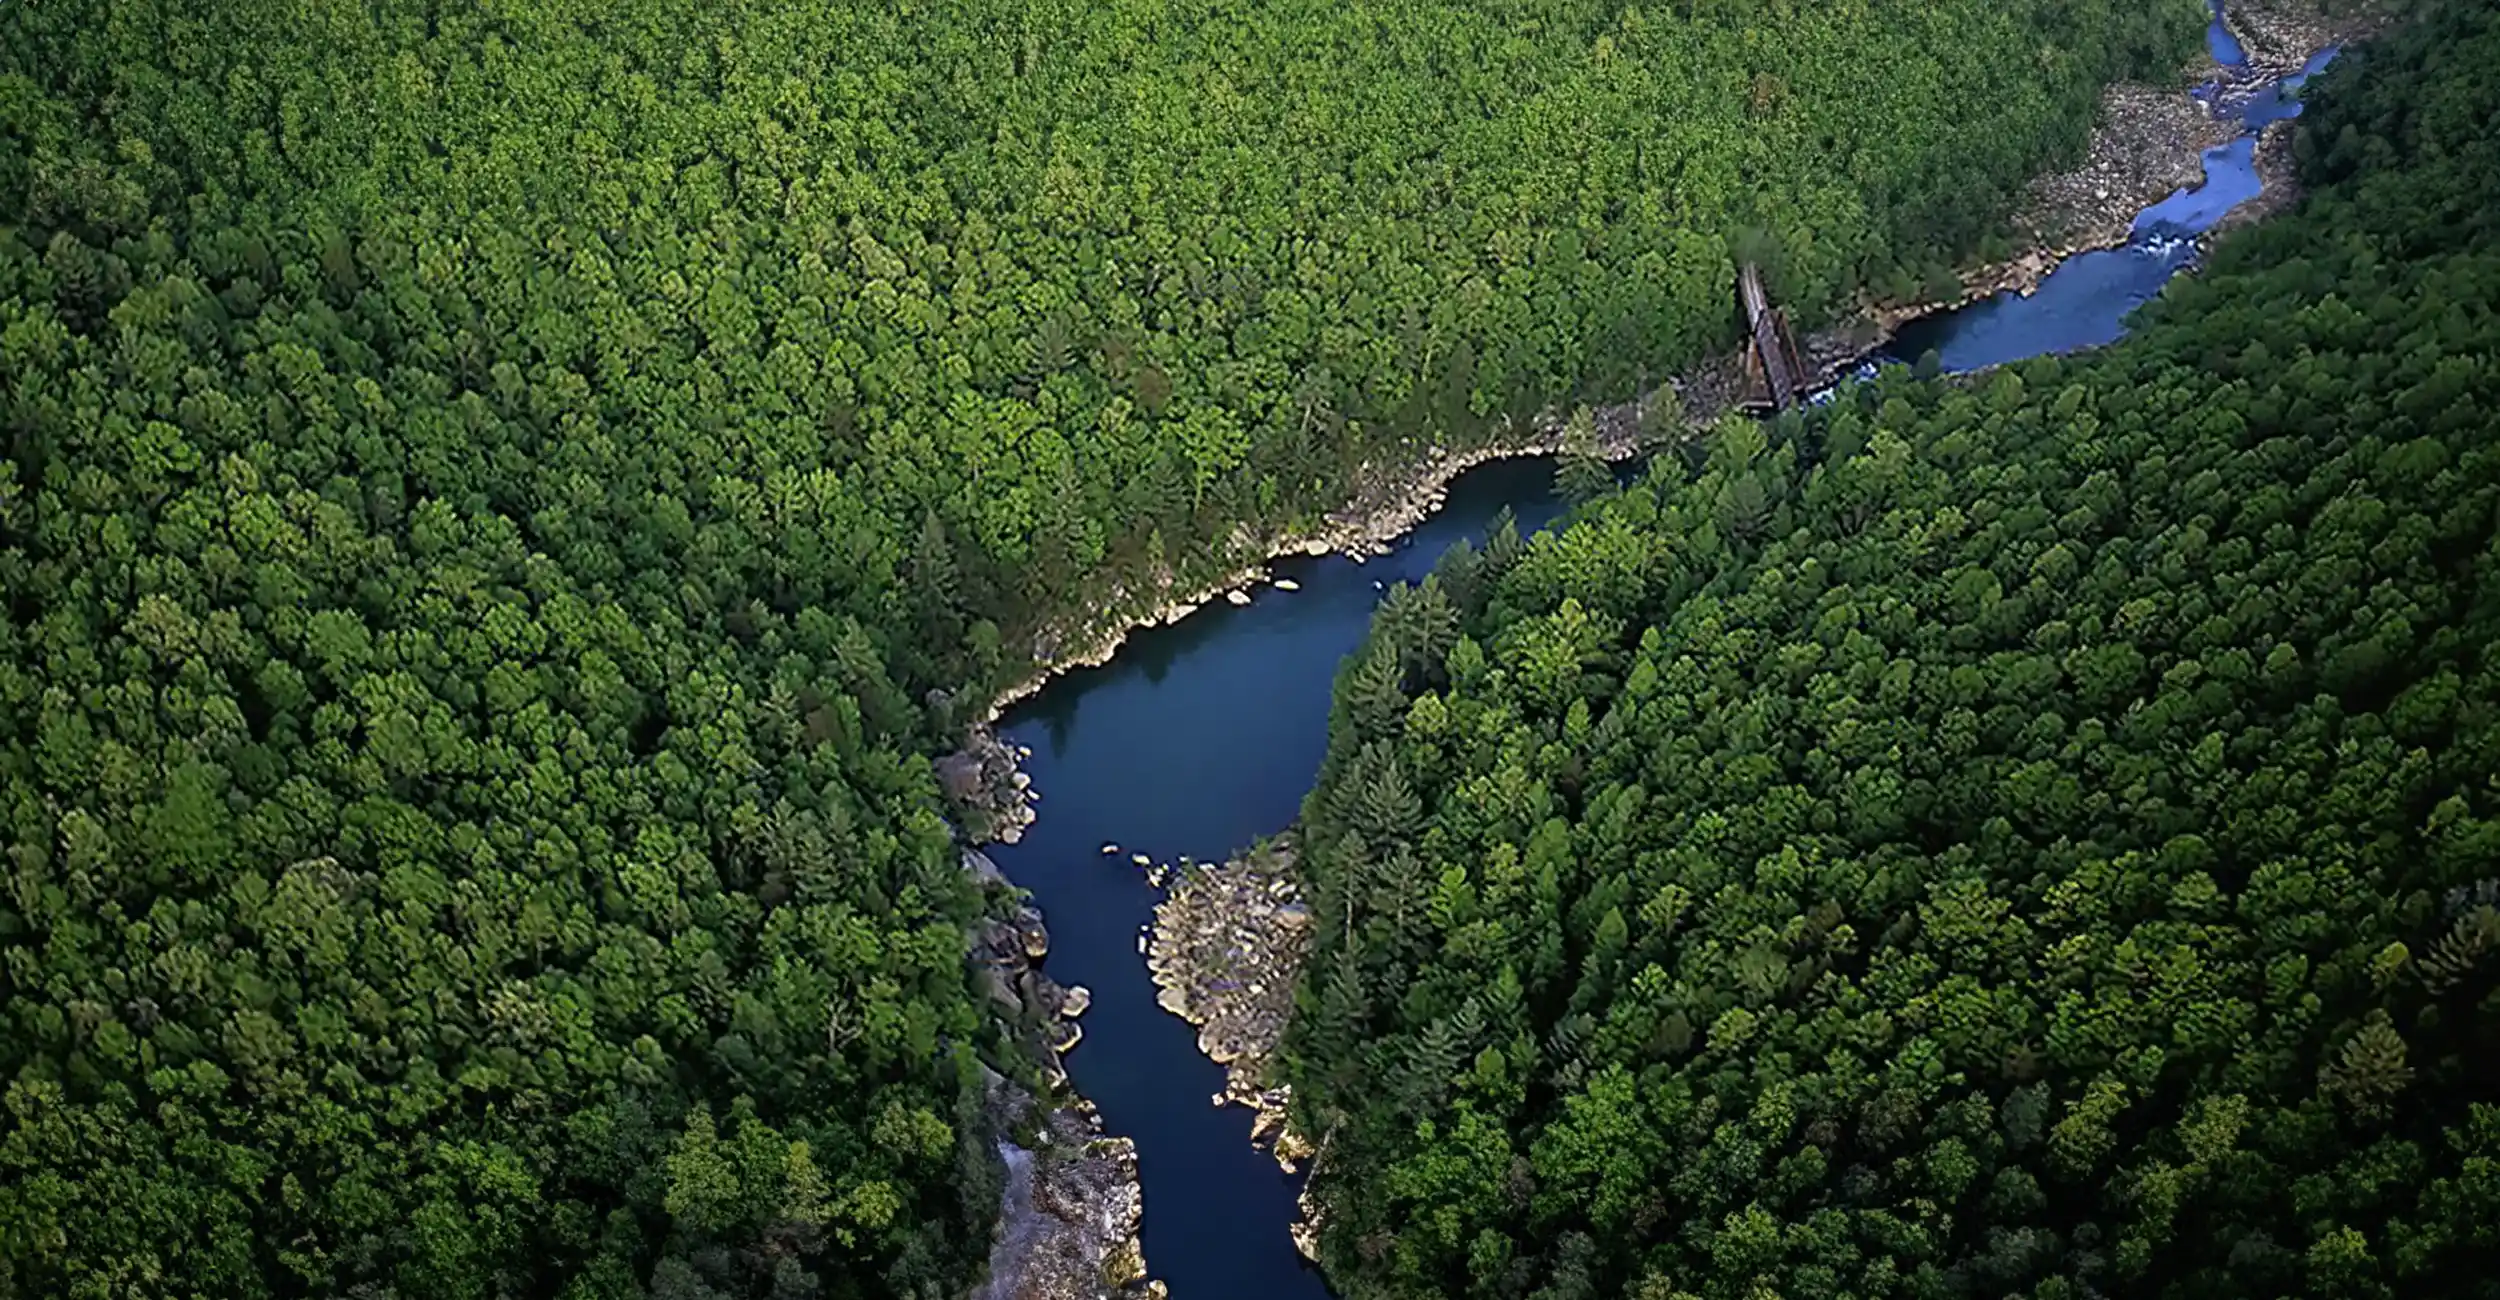 An aerial photo of a river winding through dense forest